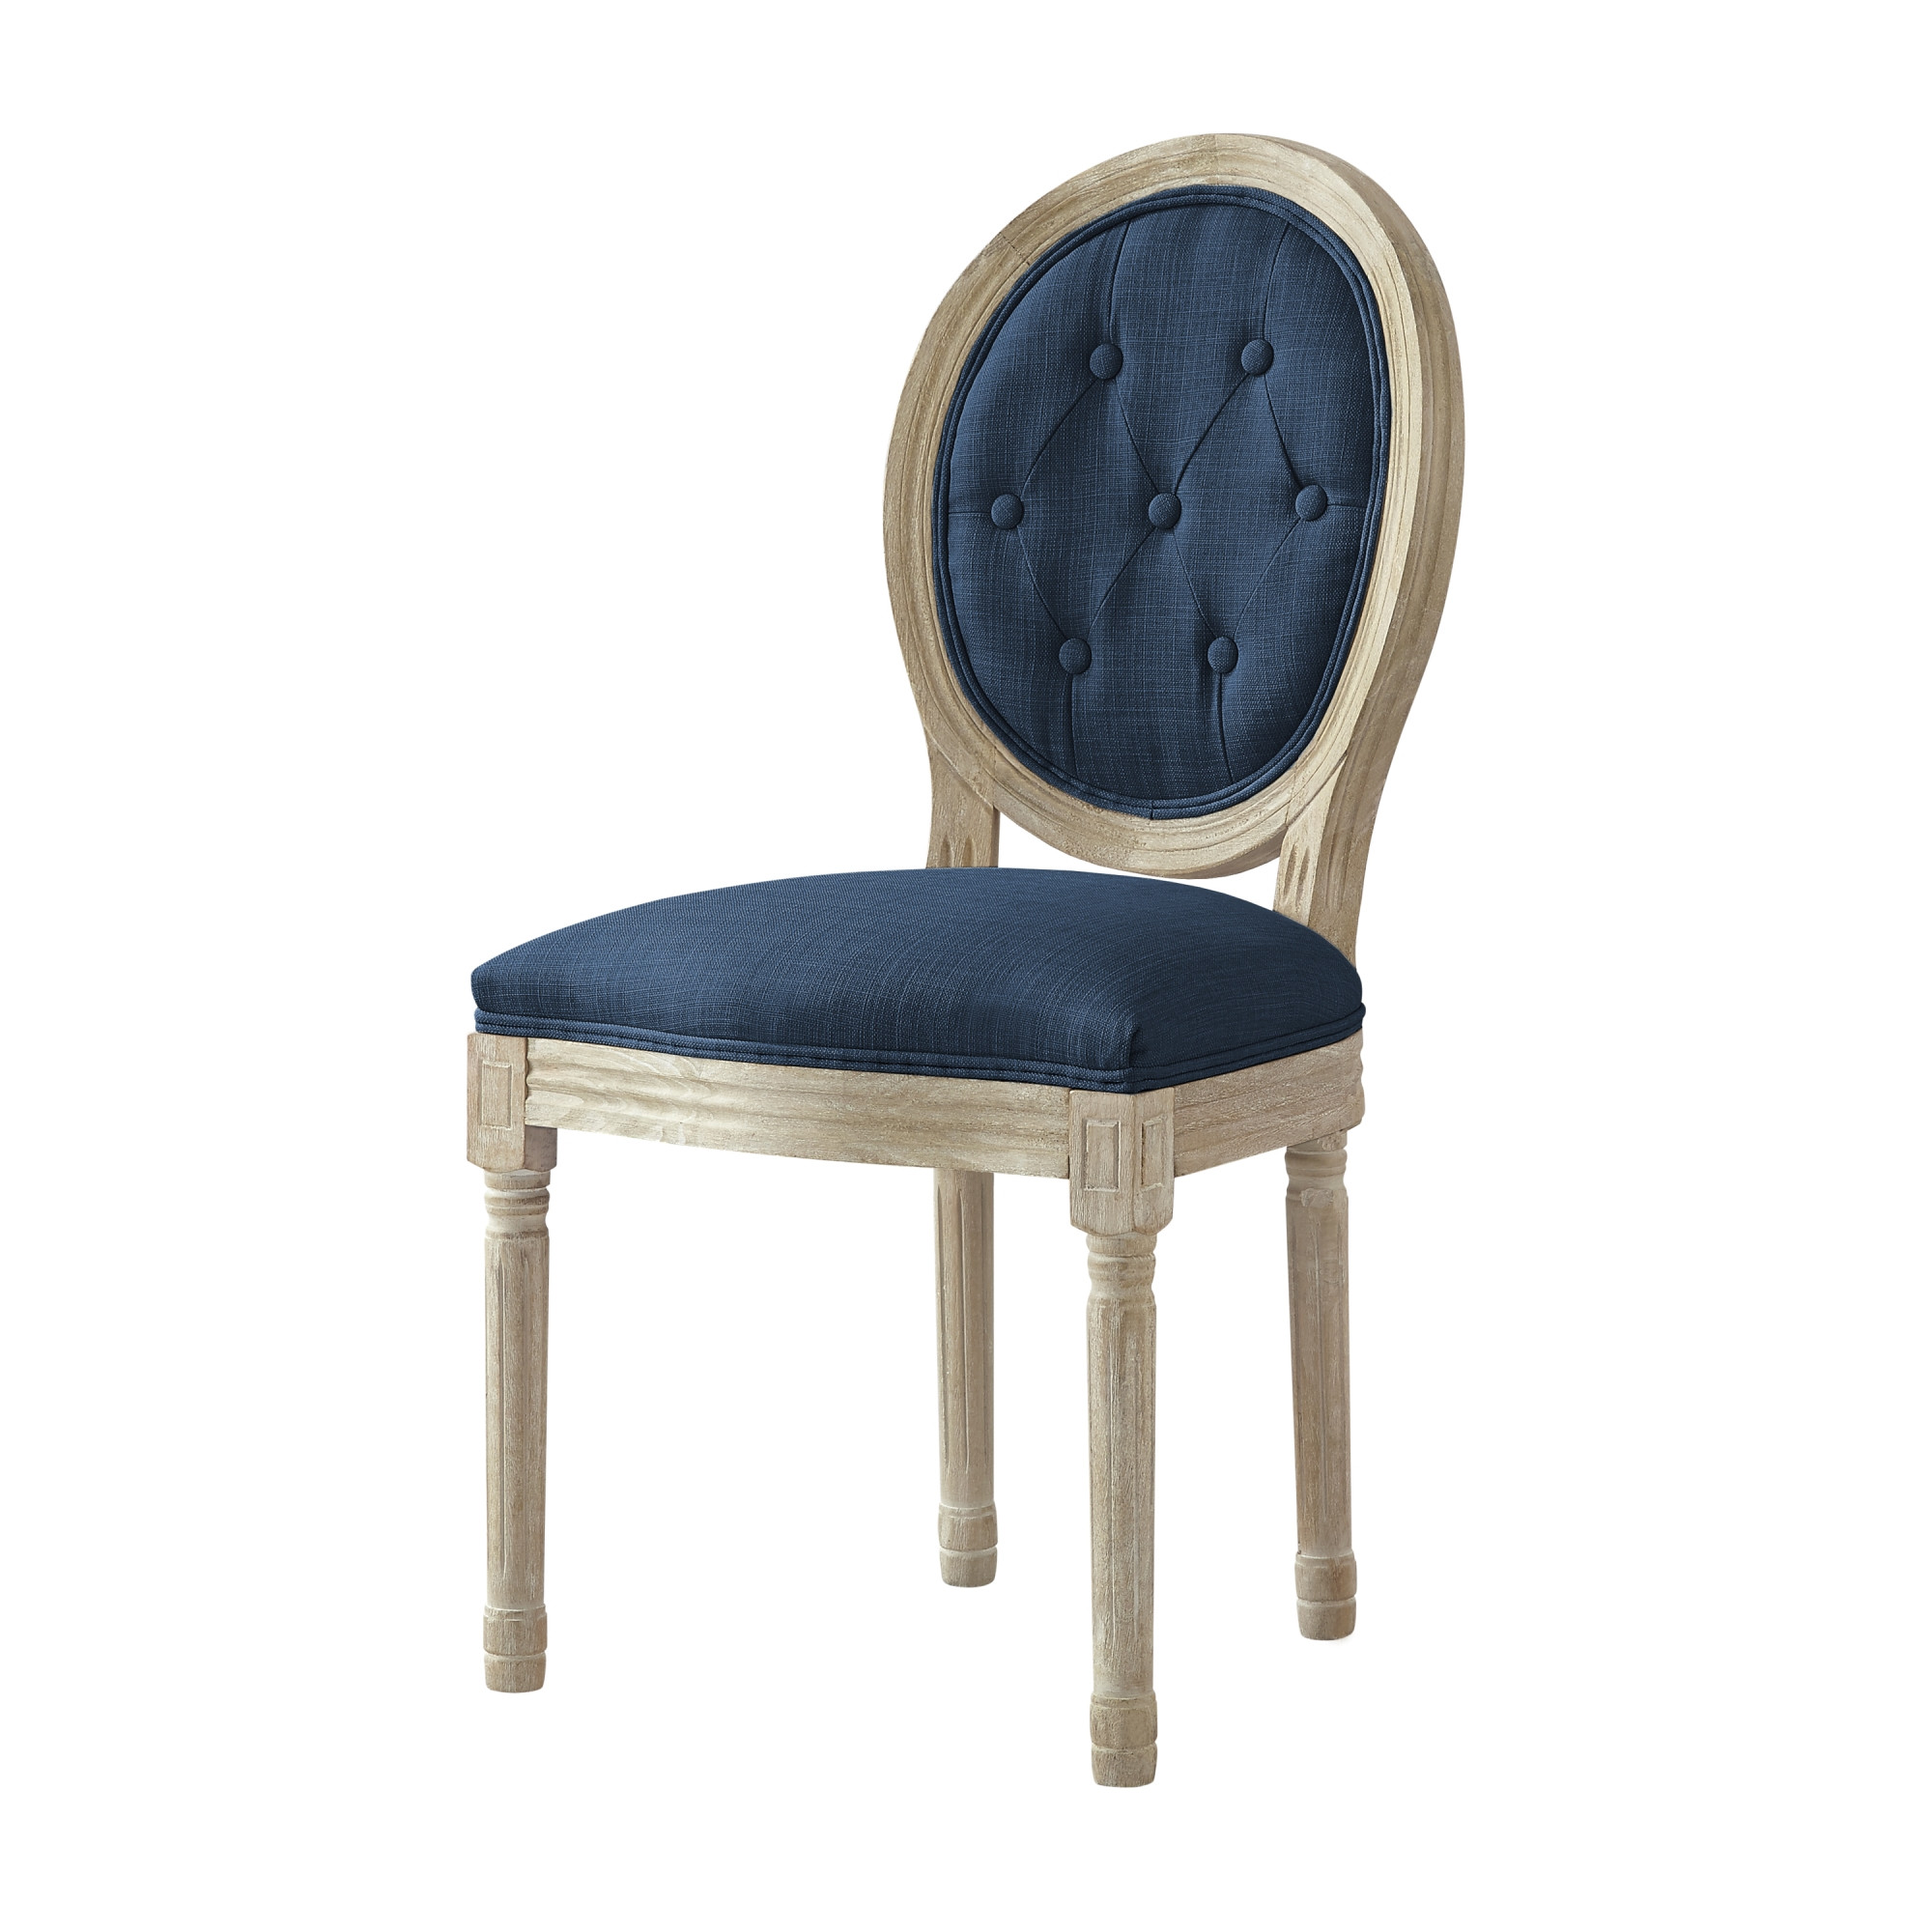 Tufted Navy Blue and Brown Upholstered Linen Dining Side Chair-535369-1